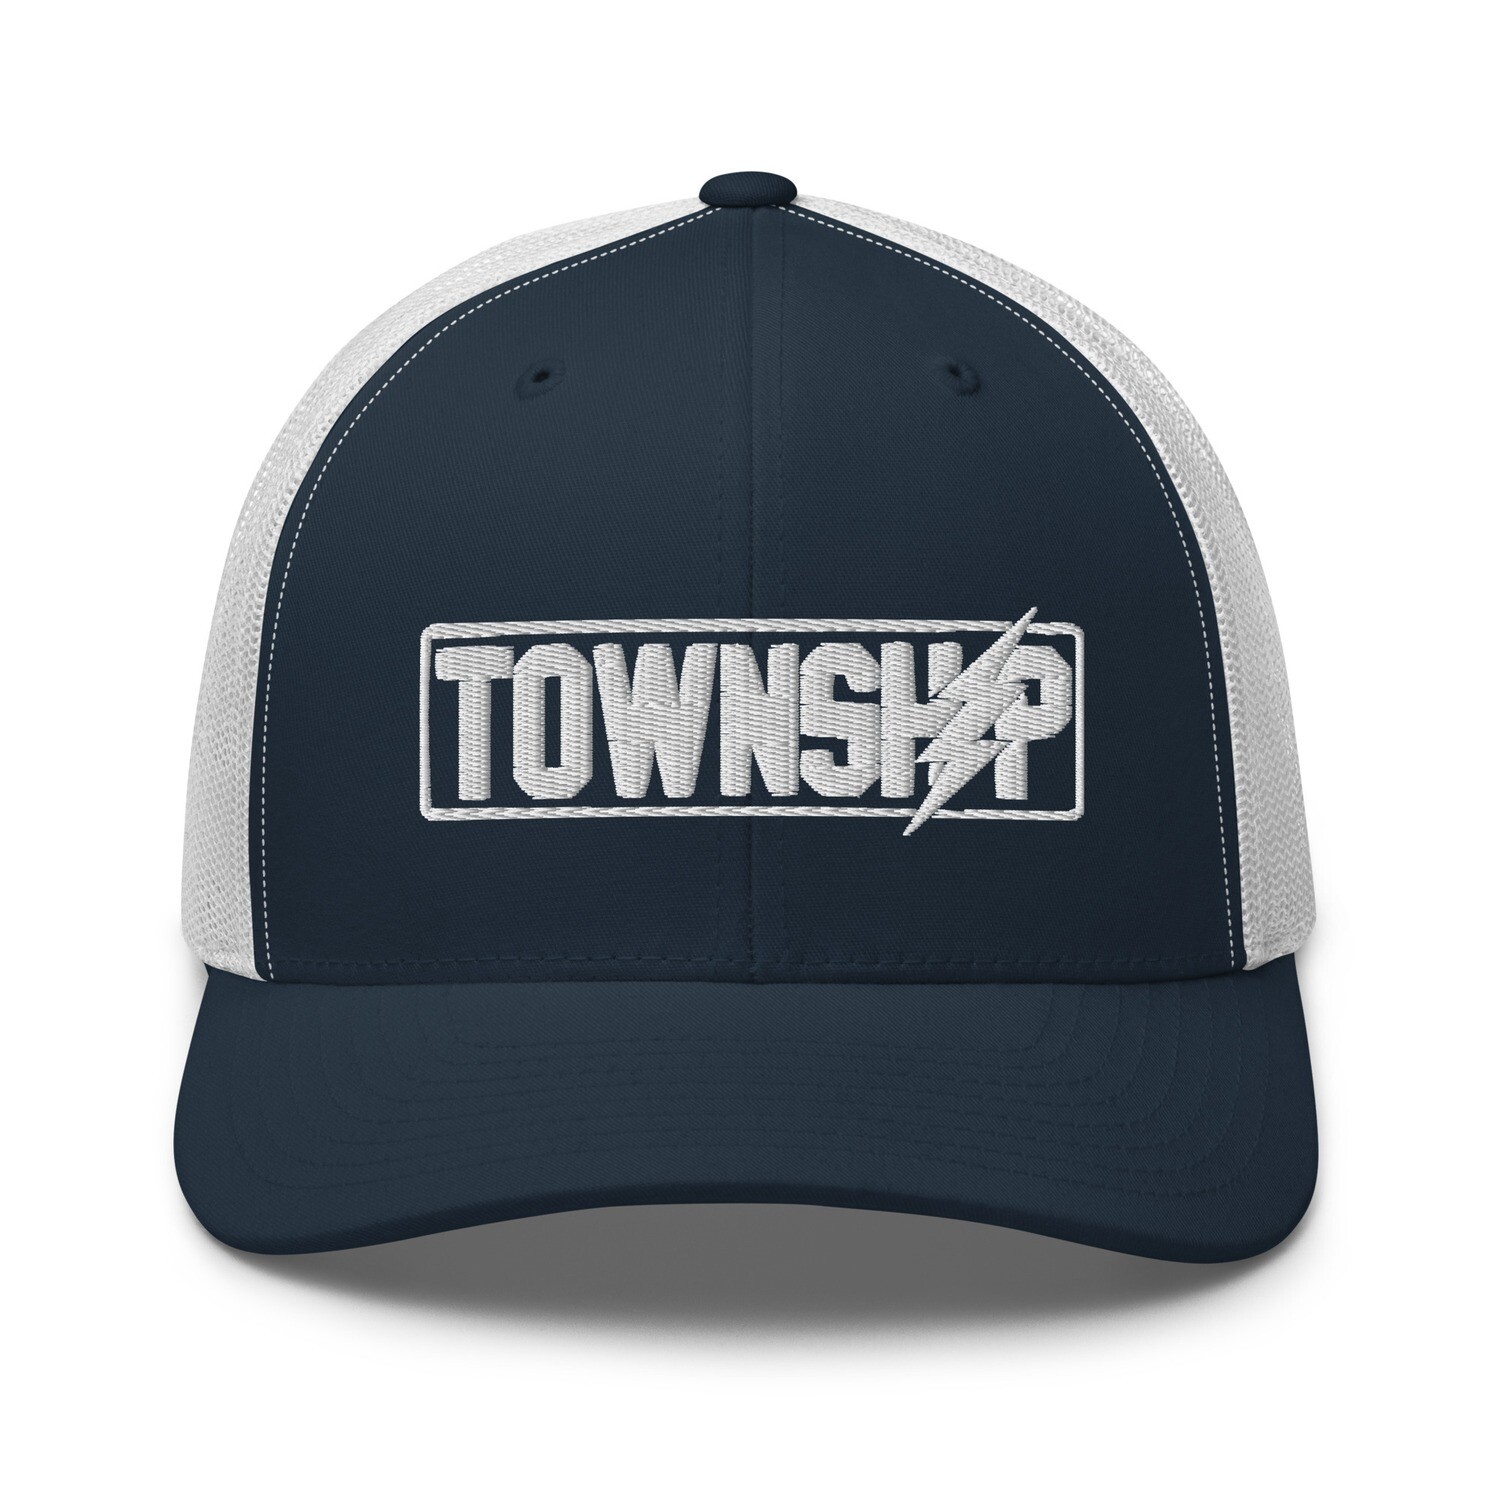 Township Embroidered Trucker Hat